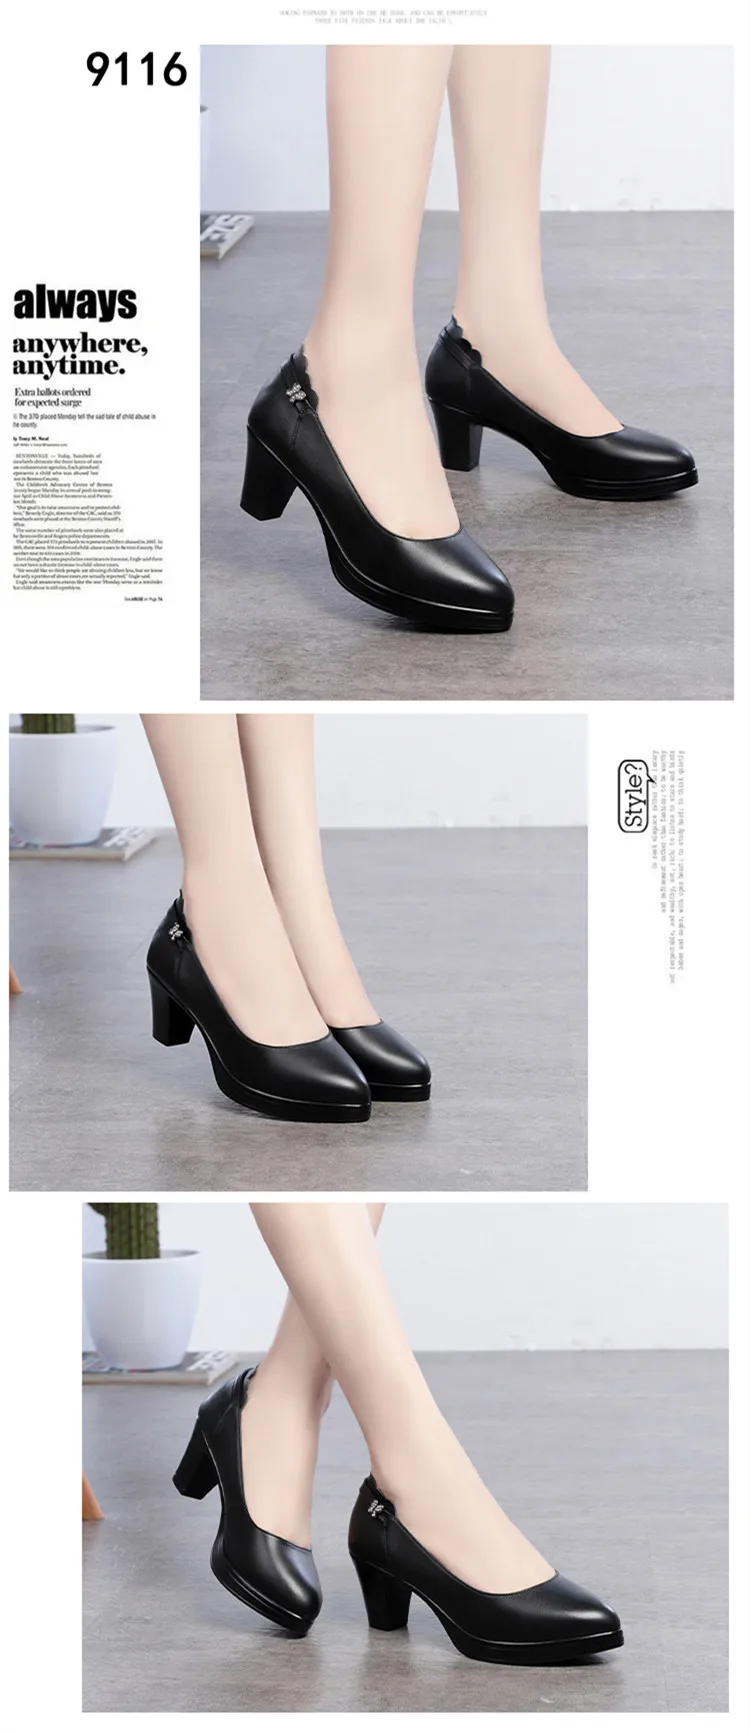 classic black heels AIYUQI Women Shoes High-heel New Genuine Leather Women Formal Shoes Large Size 41 42 43 Platform Women's Office Shoes high heels classic shoes